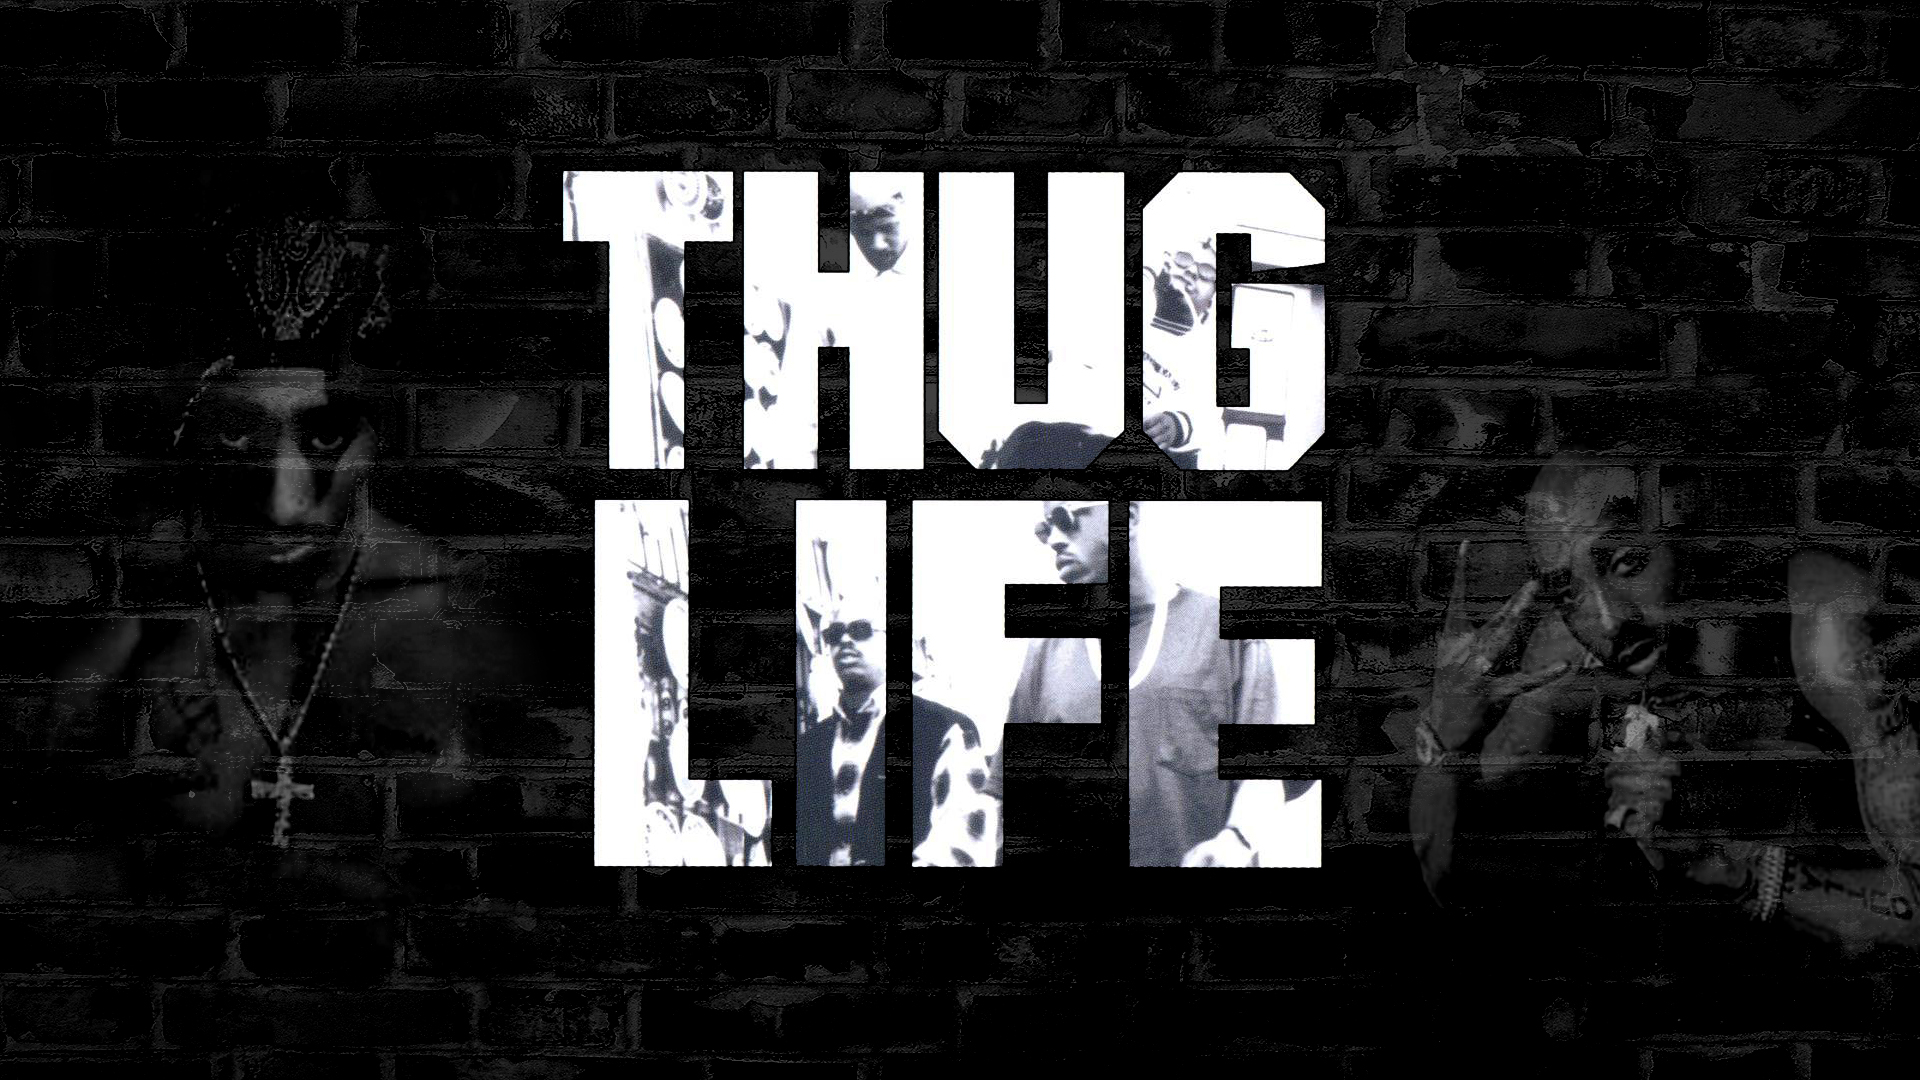 Free Download Tupac Thug Life Rap Wallpapers 1920x1080 For Your Desktop Mobile Tablet Explore 48 2pac Wallpaper Hd Tupac Shakur Wallpaper 2pac Wallpaper Thug Life Tupac Pics And Wallpapers - 2pac tupac roblox music codes youtube